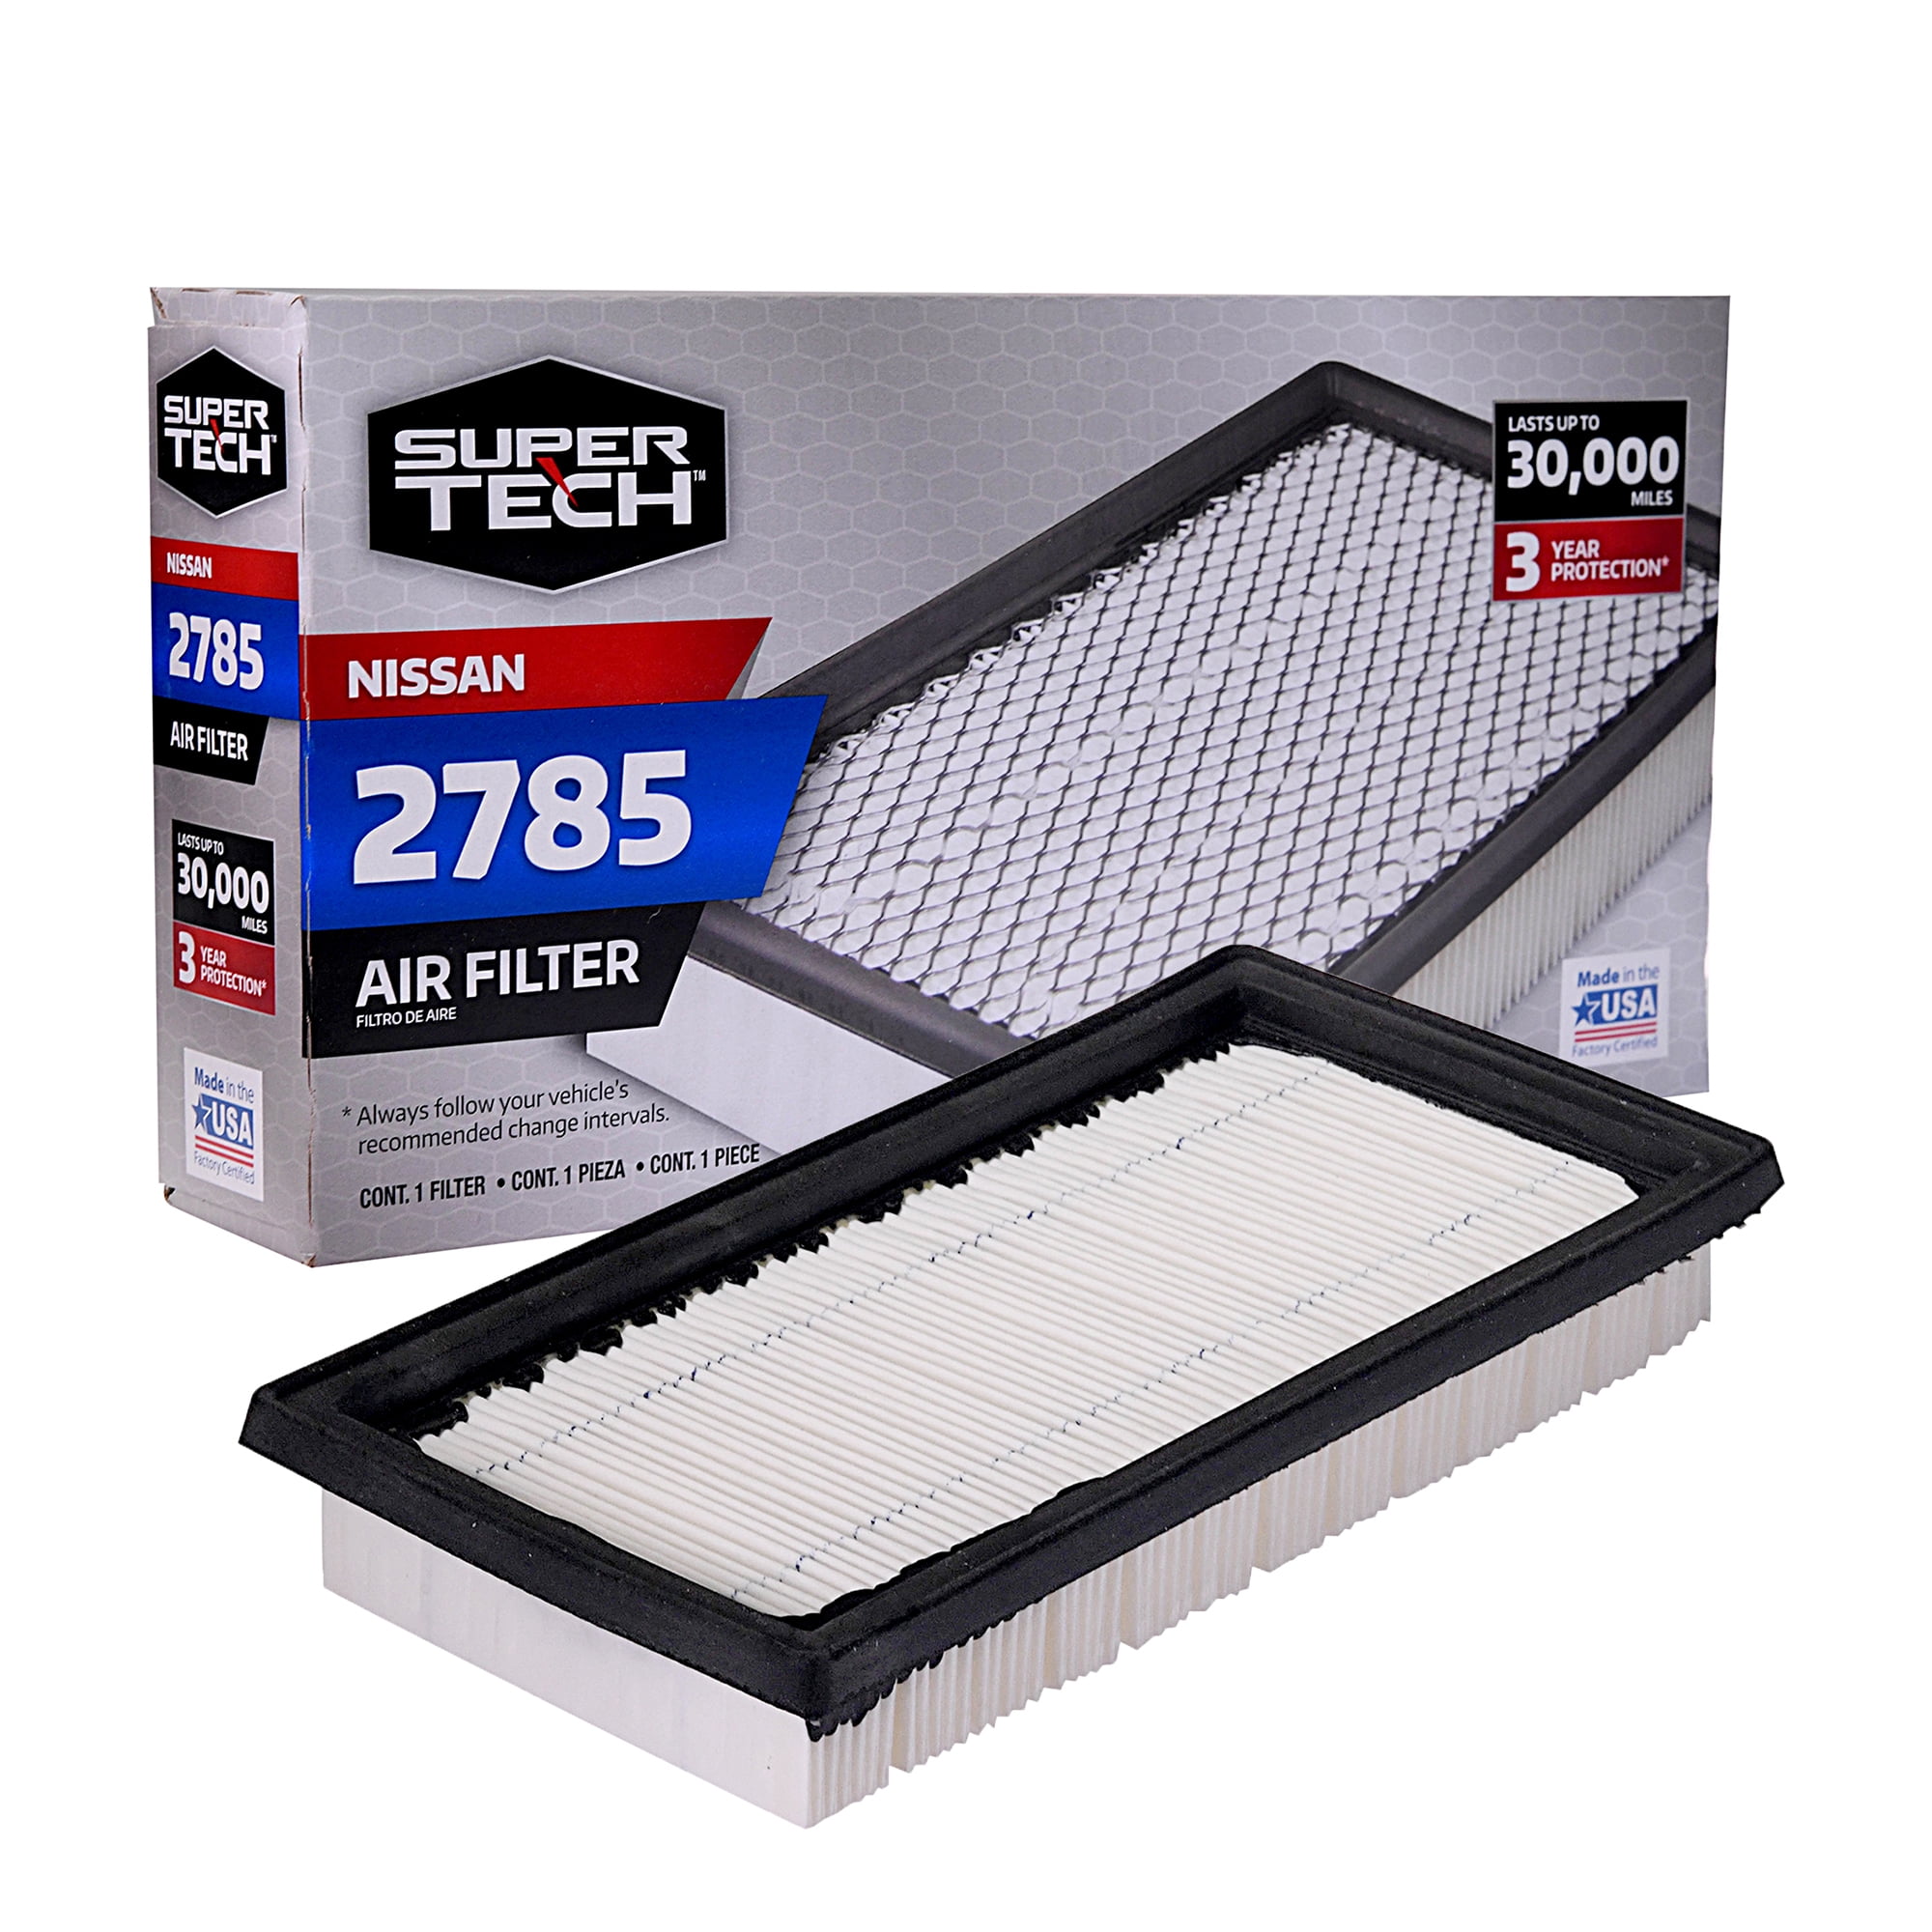 10x sct filtro aire sb 3250 Air Filter